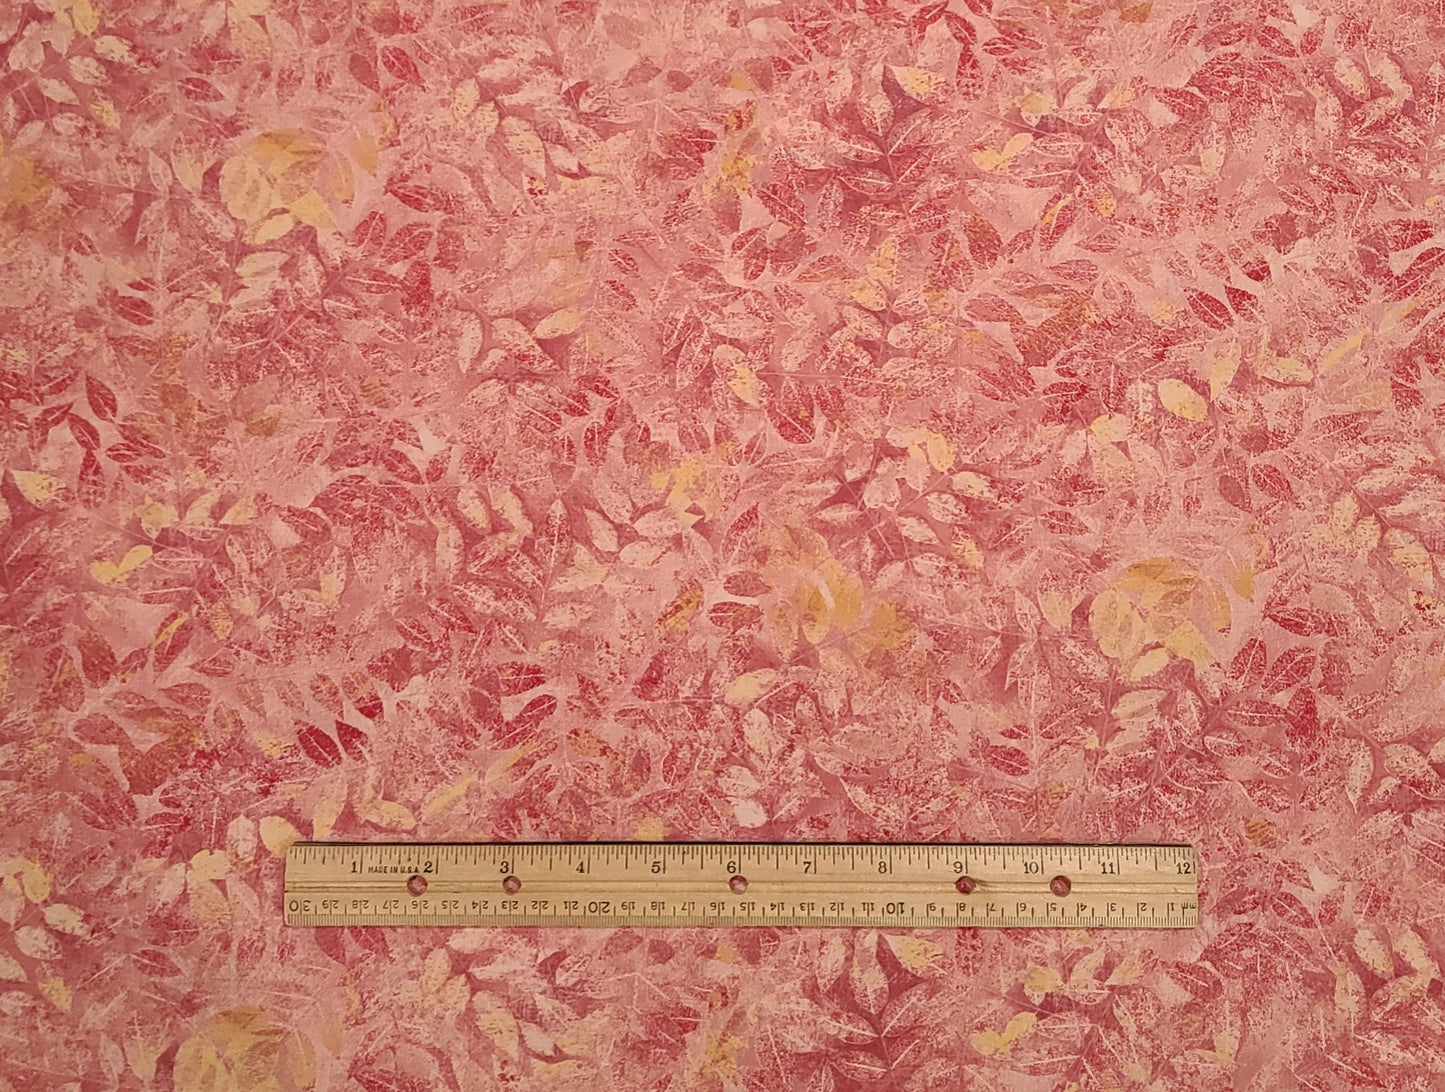 Fallen Leaves GP Creations Licensed to Wilmington Prints - Allover Pink, Dusty Rose and Gold Leaf Pattern Fabric